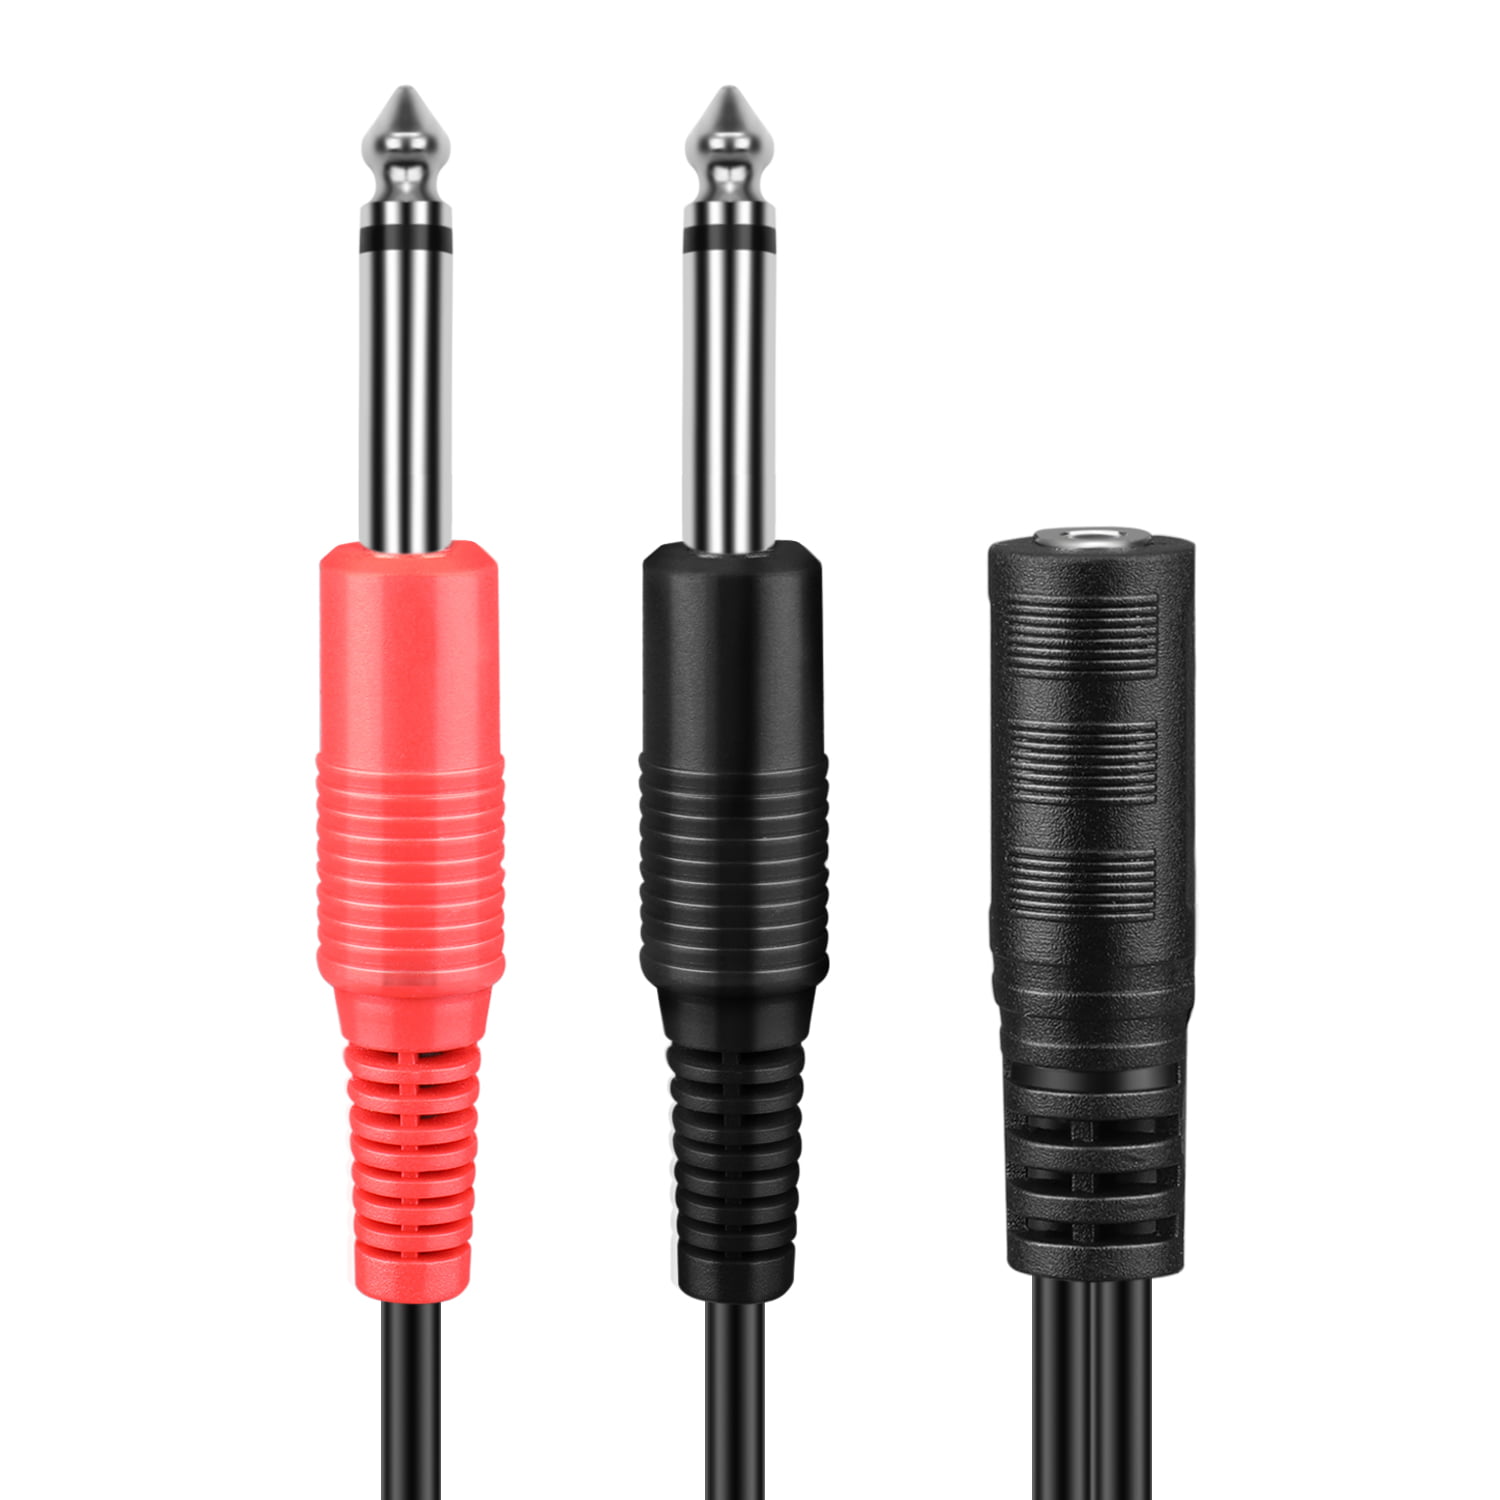 TNP 3.5mm TRS to 2 Dual 1//4 Inch TS Stereo Audio Breakout Cable Adapter 3.5mm 1//8 Female to 1//4 6.35mm Mono TS Male Headphone Jack Plug Y Splitter Cable Combiner Connector Wire Cord 20cm//8inch